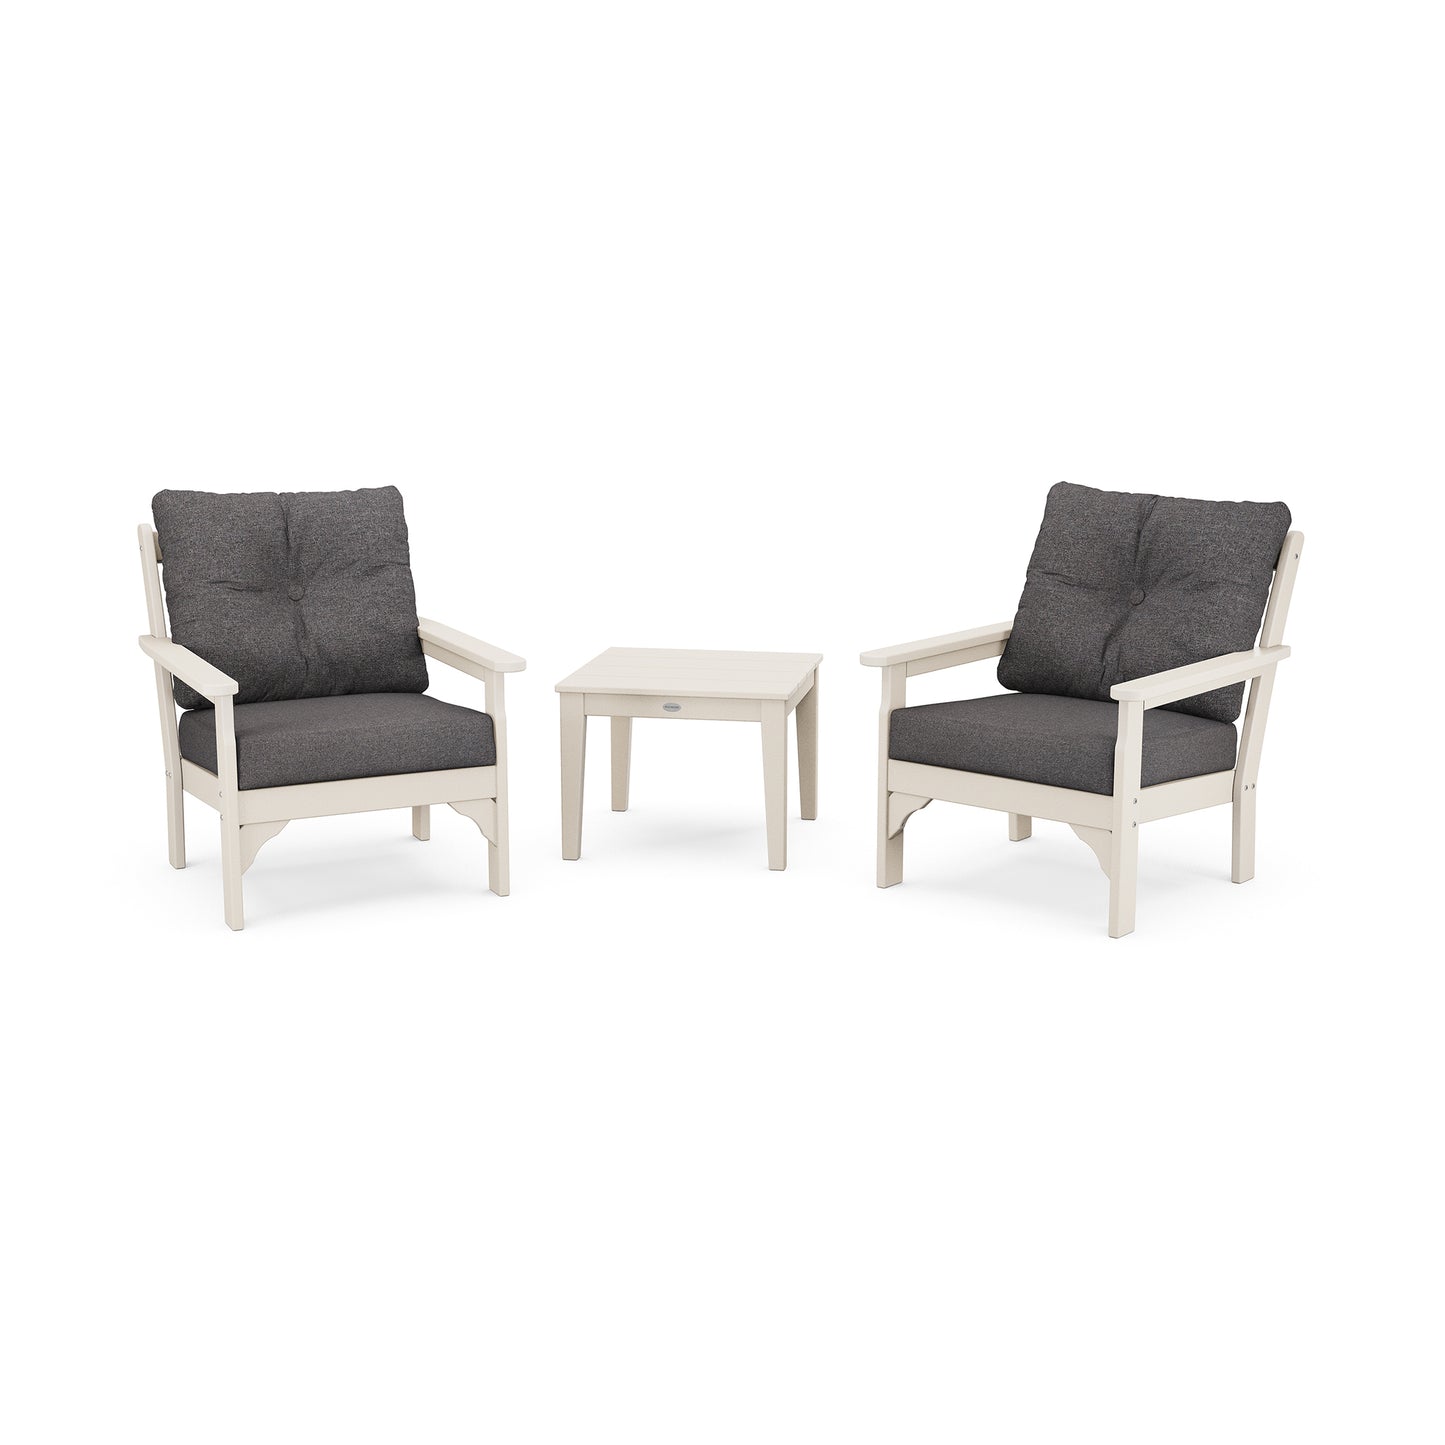 Two white POLYWOOD Vineyard outdoor chairs with deep seating cushions and a matching small white table, made from POLYWOOD® lumber, set against a white background.